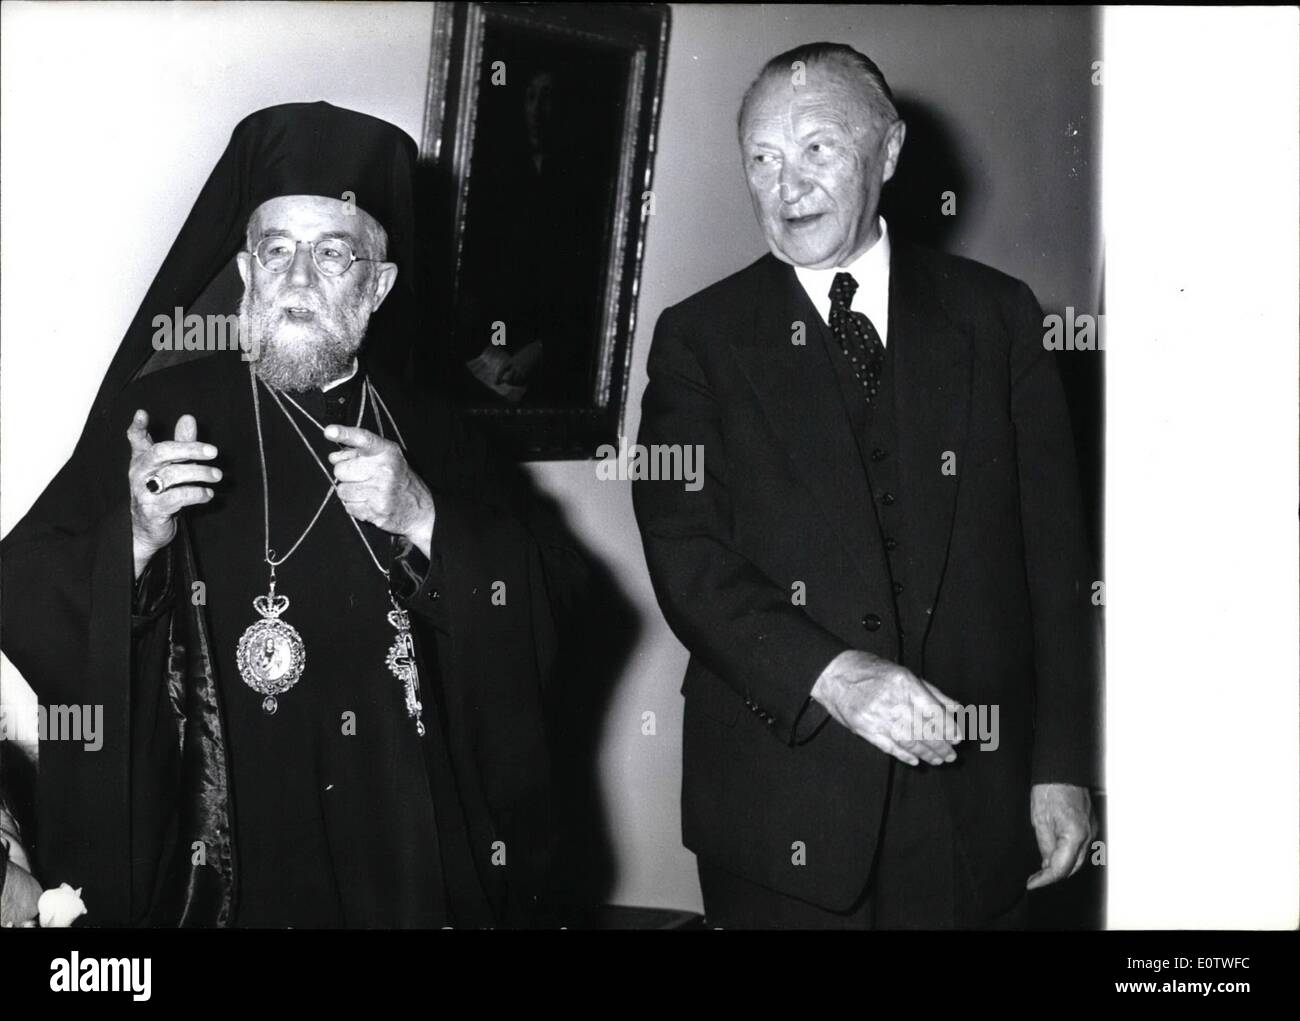 Aug. 08, 1960 - Photographers are better than canons...said the Patriarch of Antiochia when reporters ''shot'' him in the Palais Schaumburg in Bonn/West-Germany. Maximus IV, Patriarch of Antiochia, who took part in the World Eucharistic Congress in Munich, came to Bonn for a visit to Federal Chancellor Dr. Adenauer (left) on Aug. 11th. Stock Photo